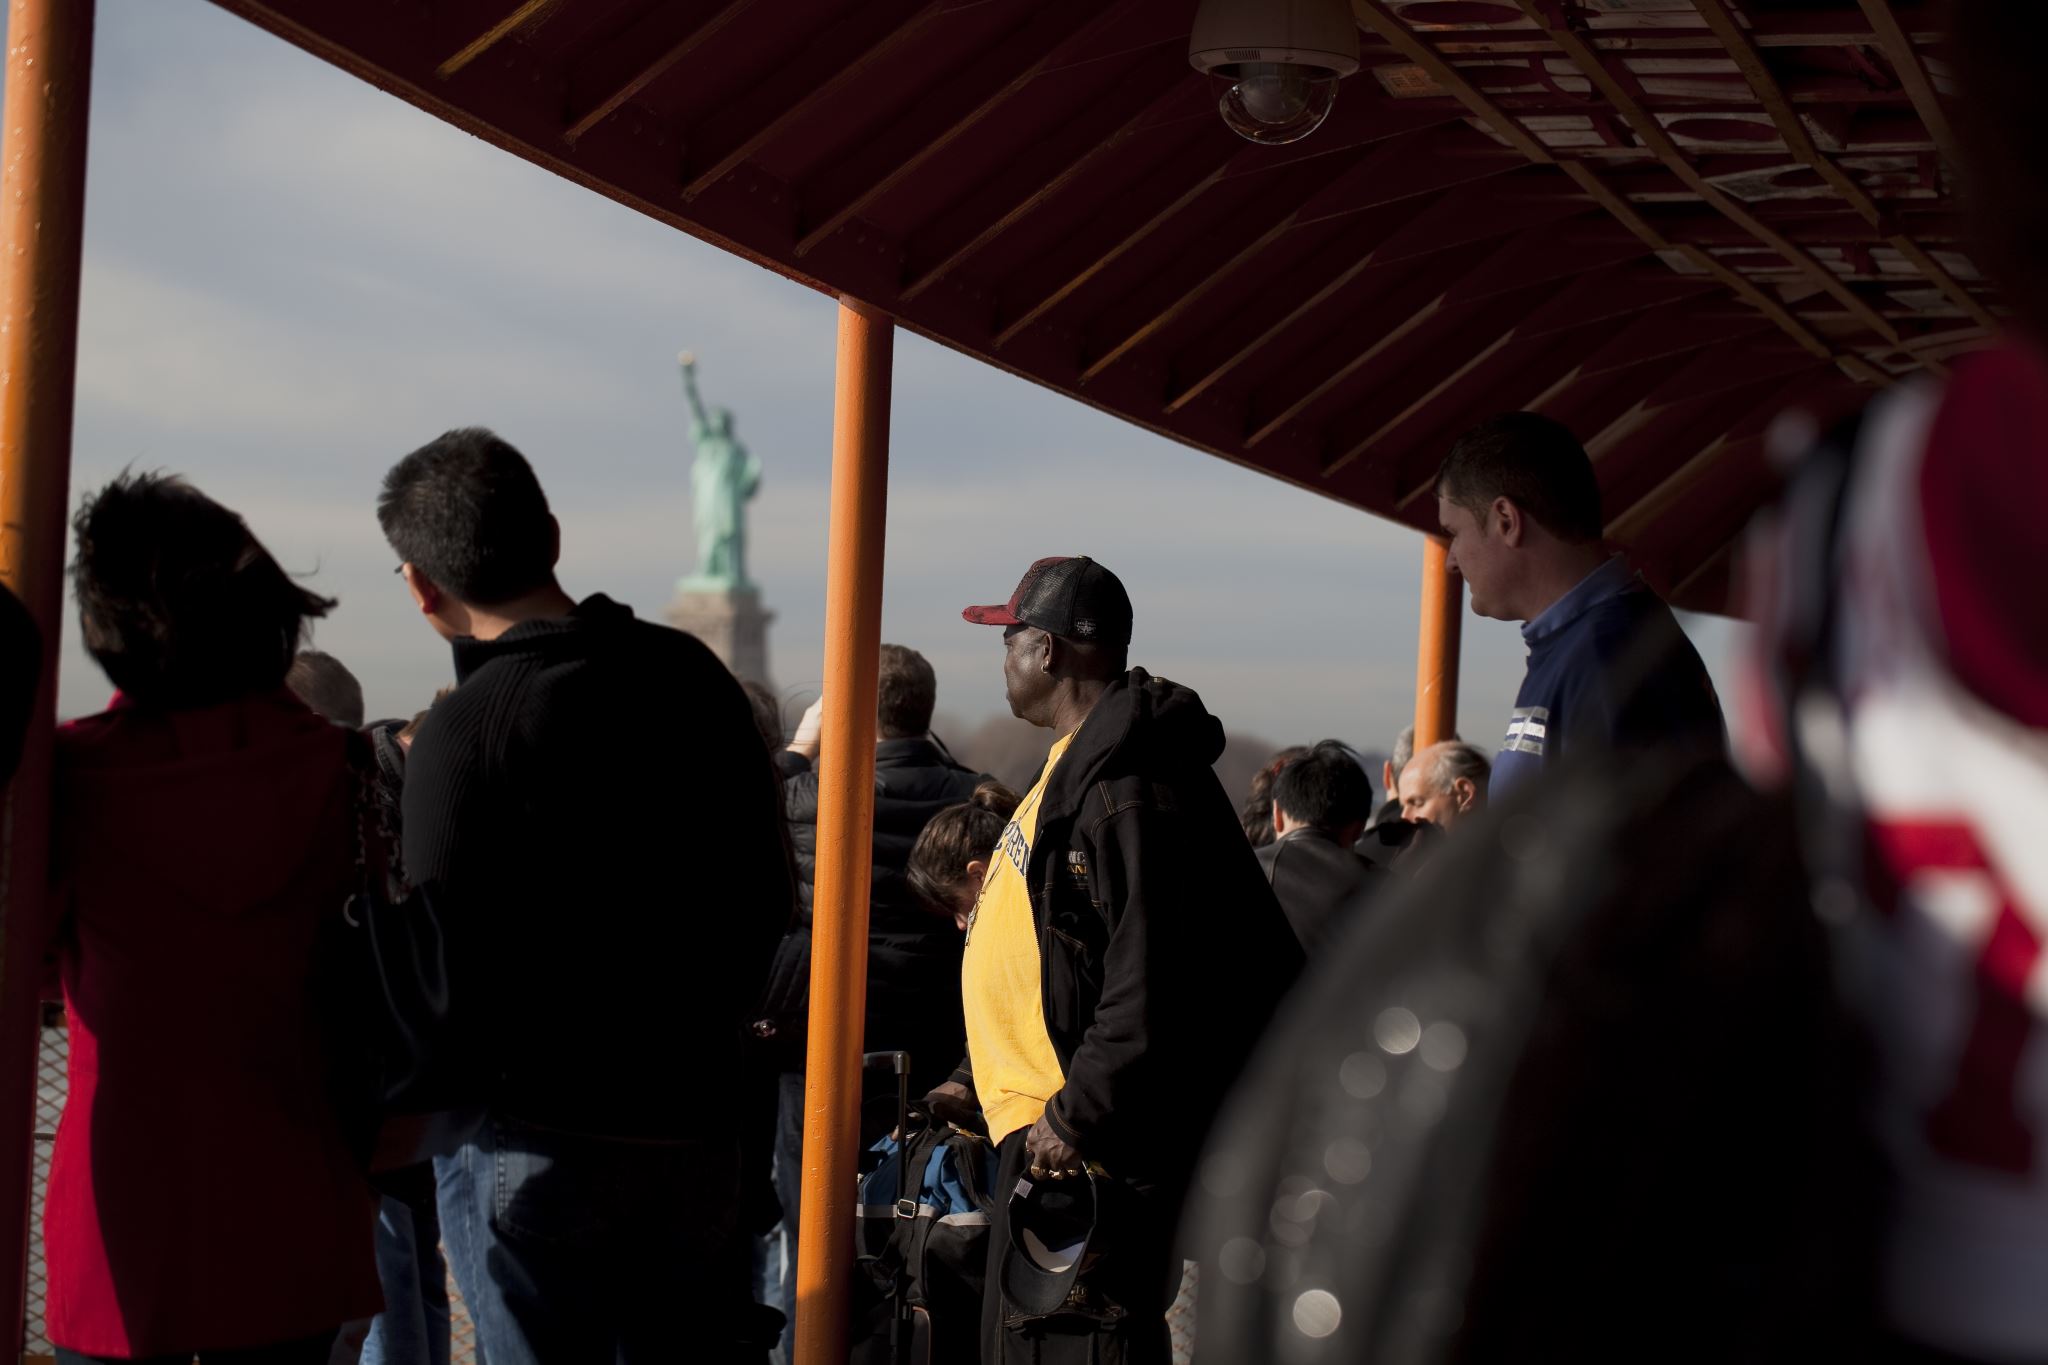 On The Staten Island Ferry